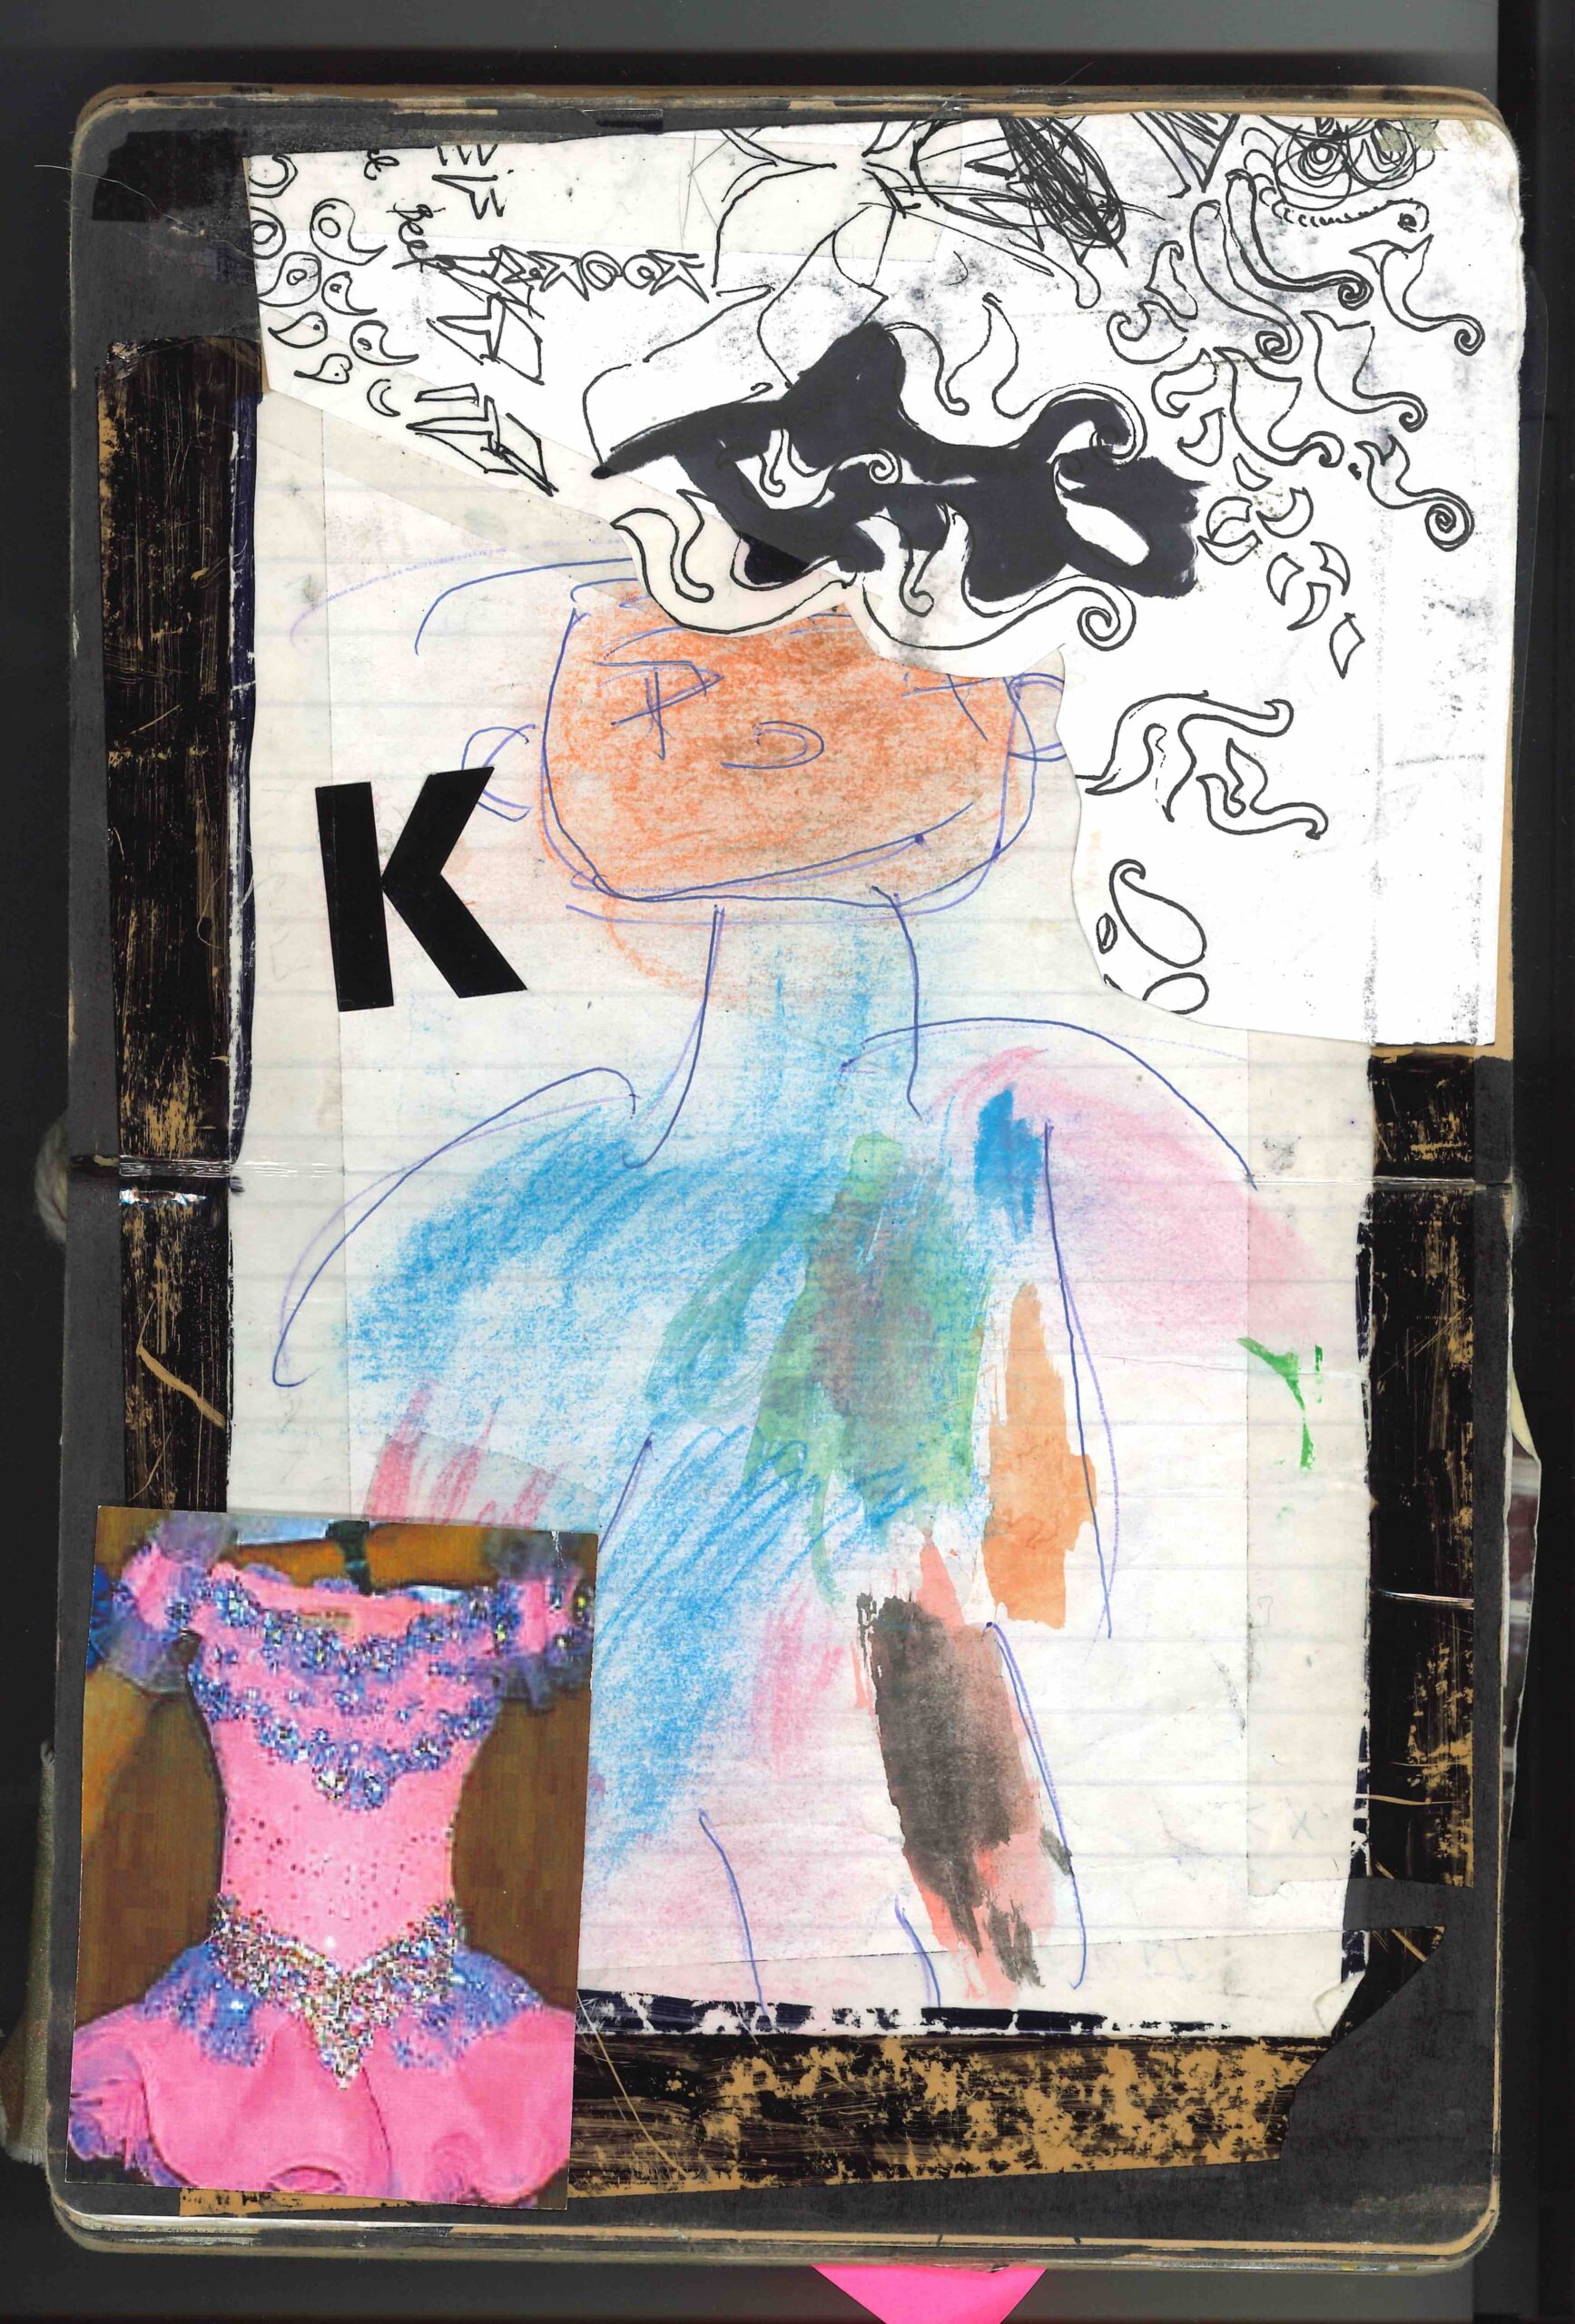 An exclusive look through Christopher Kane's first sketchbooks